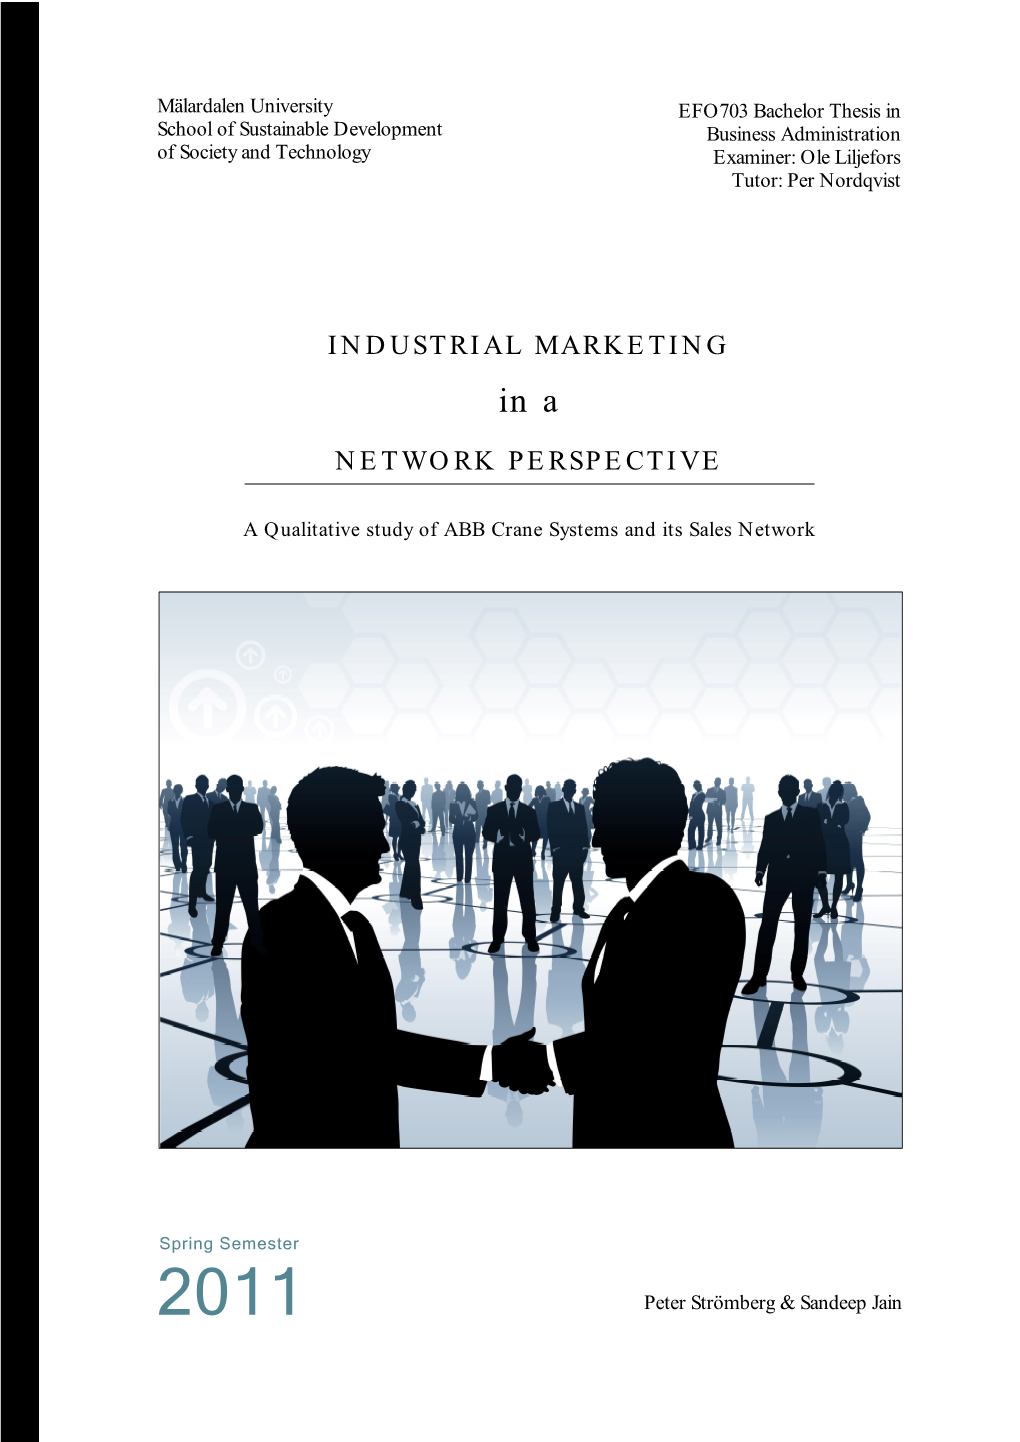 Industrial Marketing Network Perspective